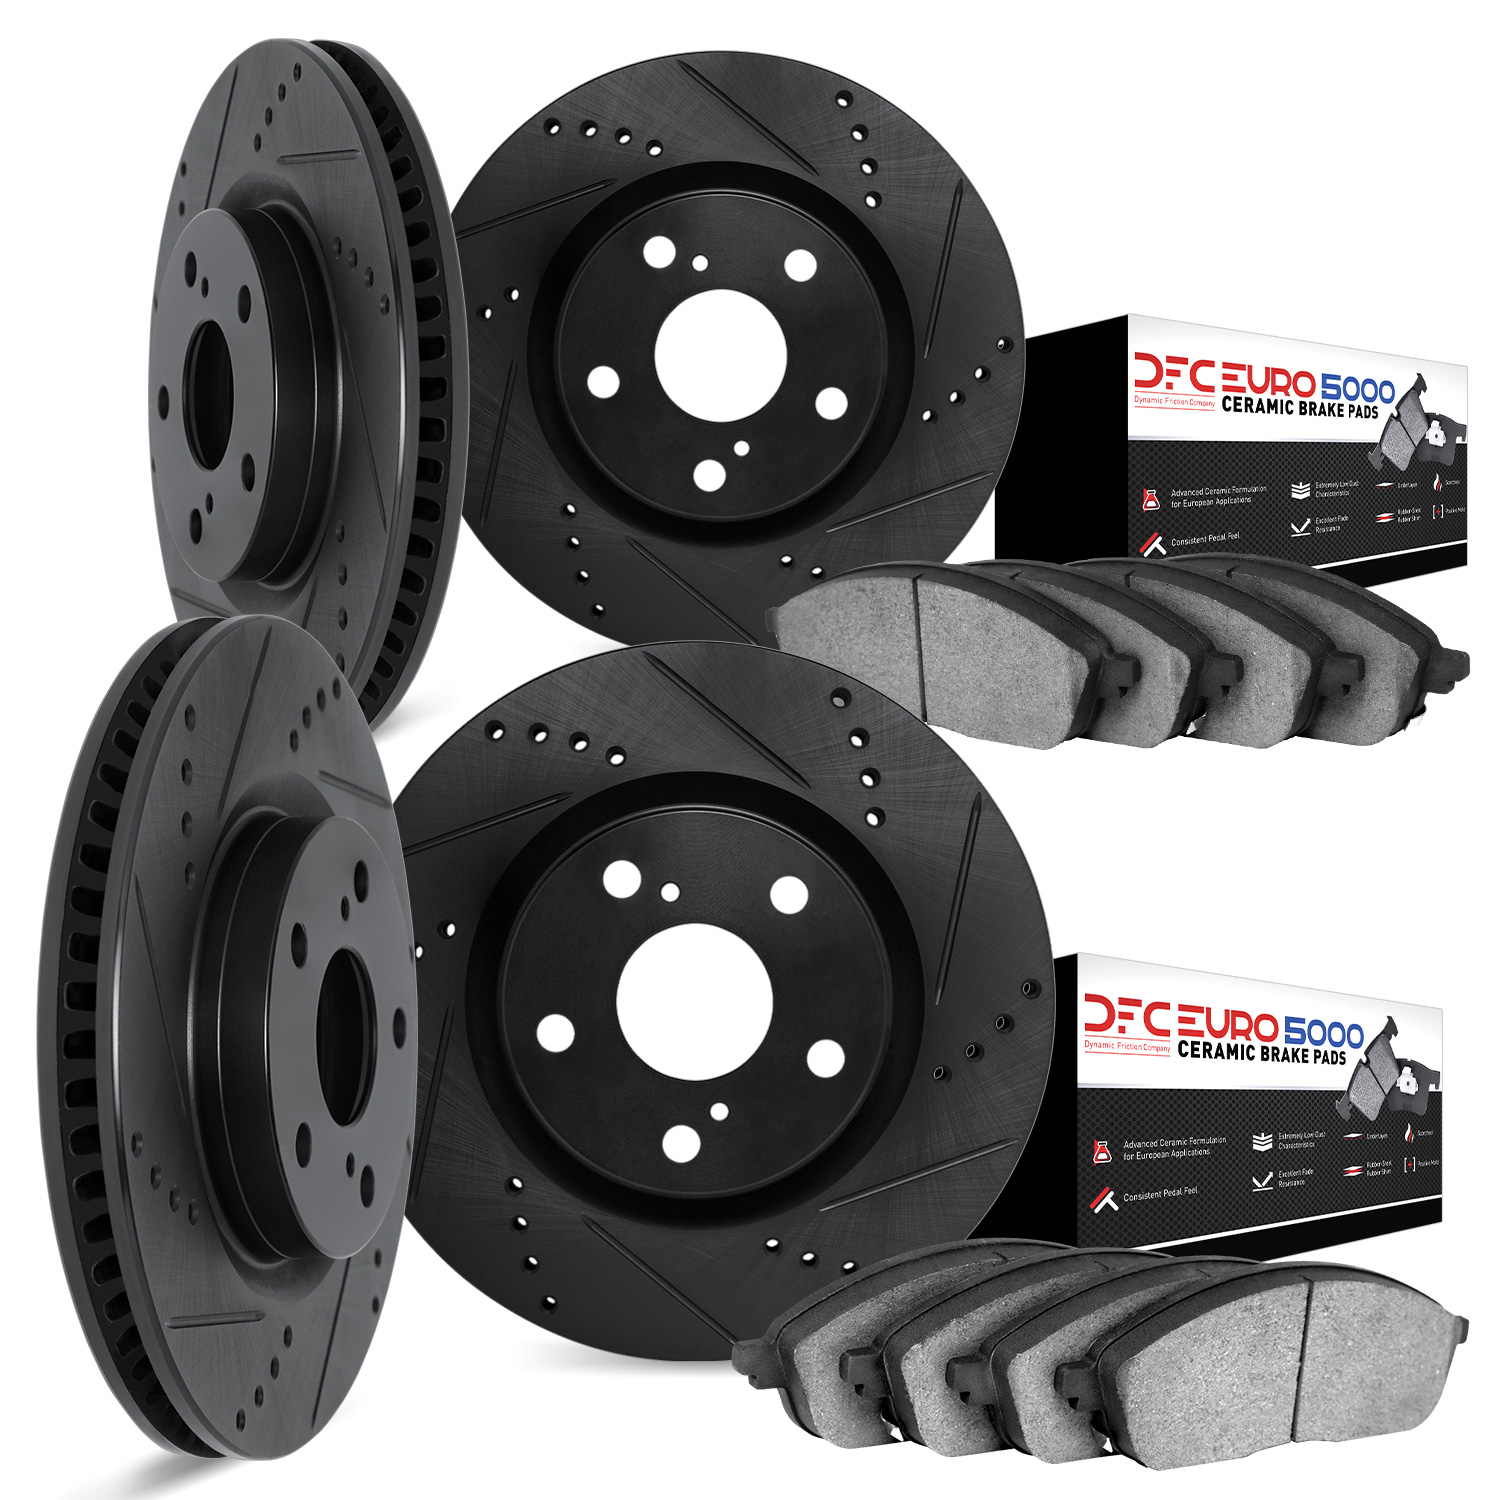 8604-31021 Drilled/Slotted Brake Rotors w/5000 Euro Ceramic Brake Pads Kit [Black], 2008-2013 BMW, Position: Front and Rear